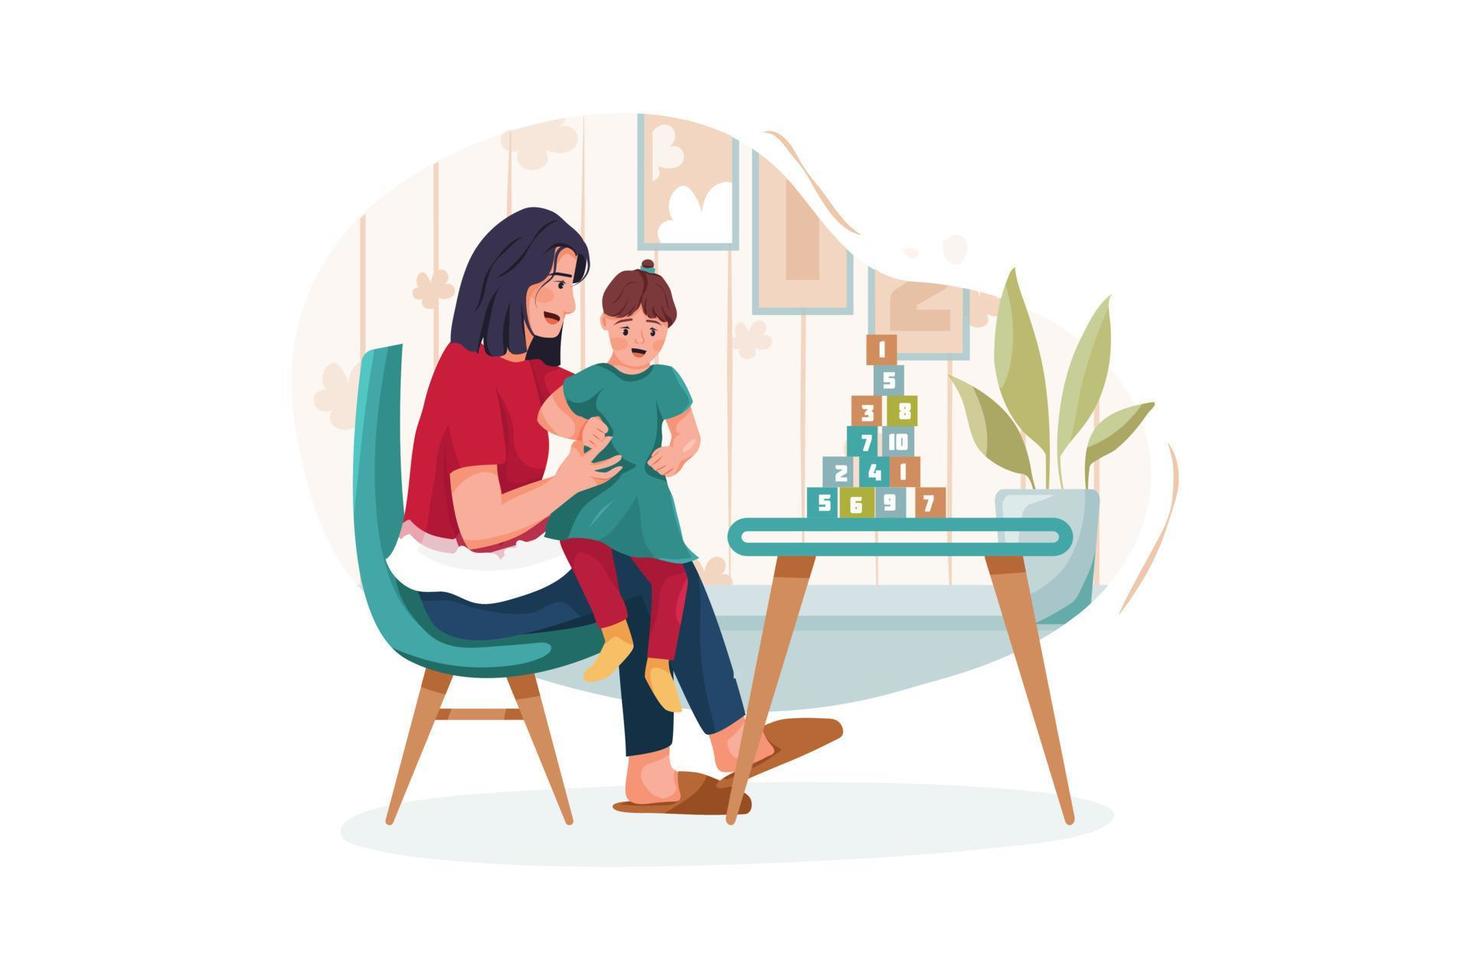 Cute little girl with young nanny at table, indoors vector